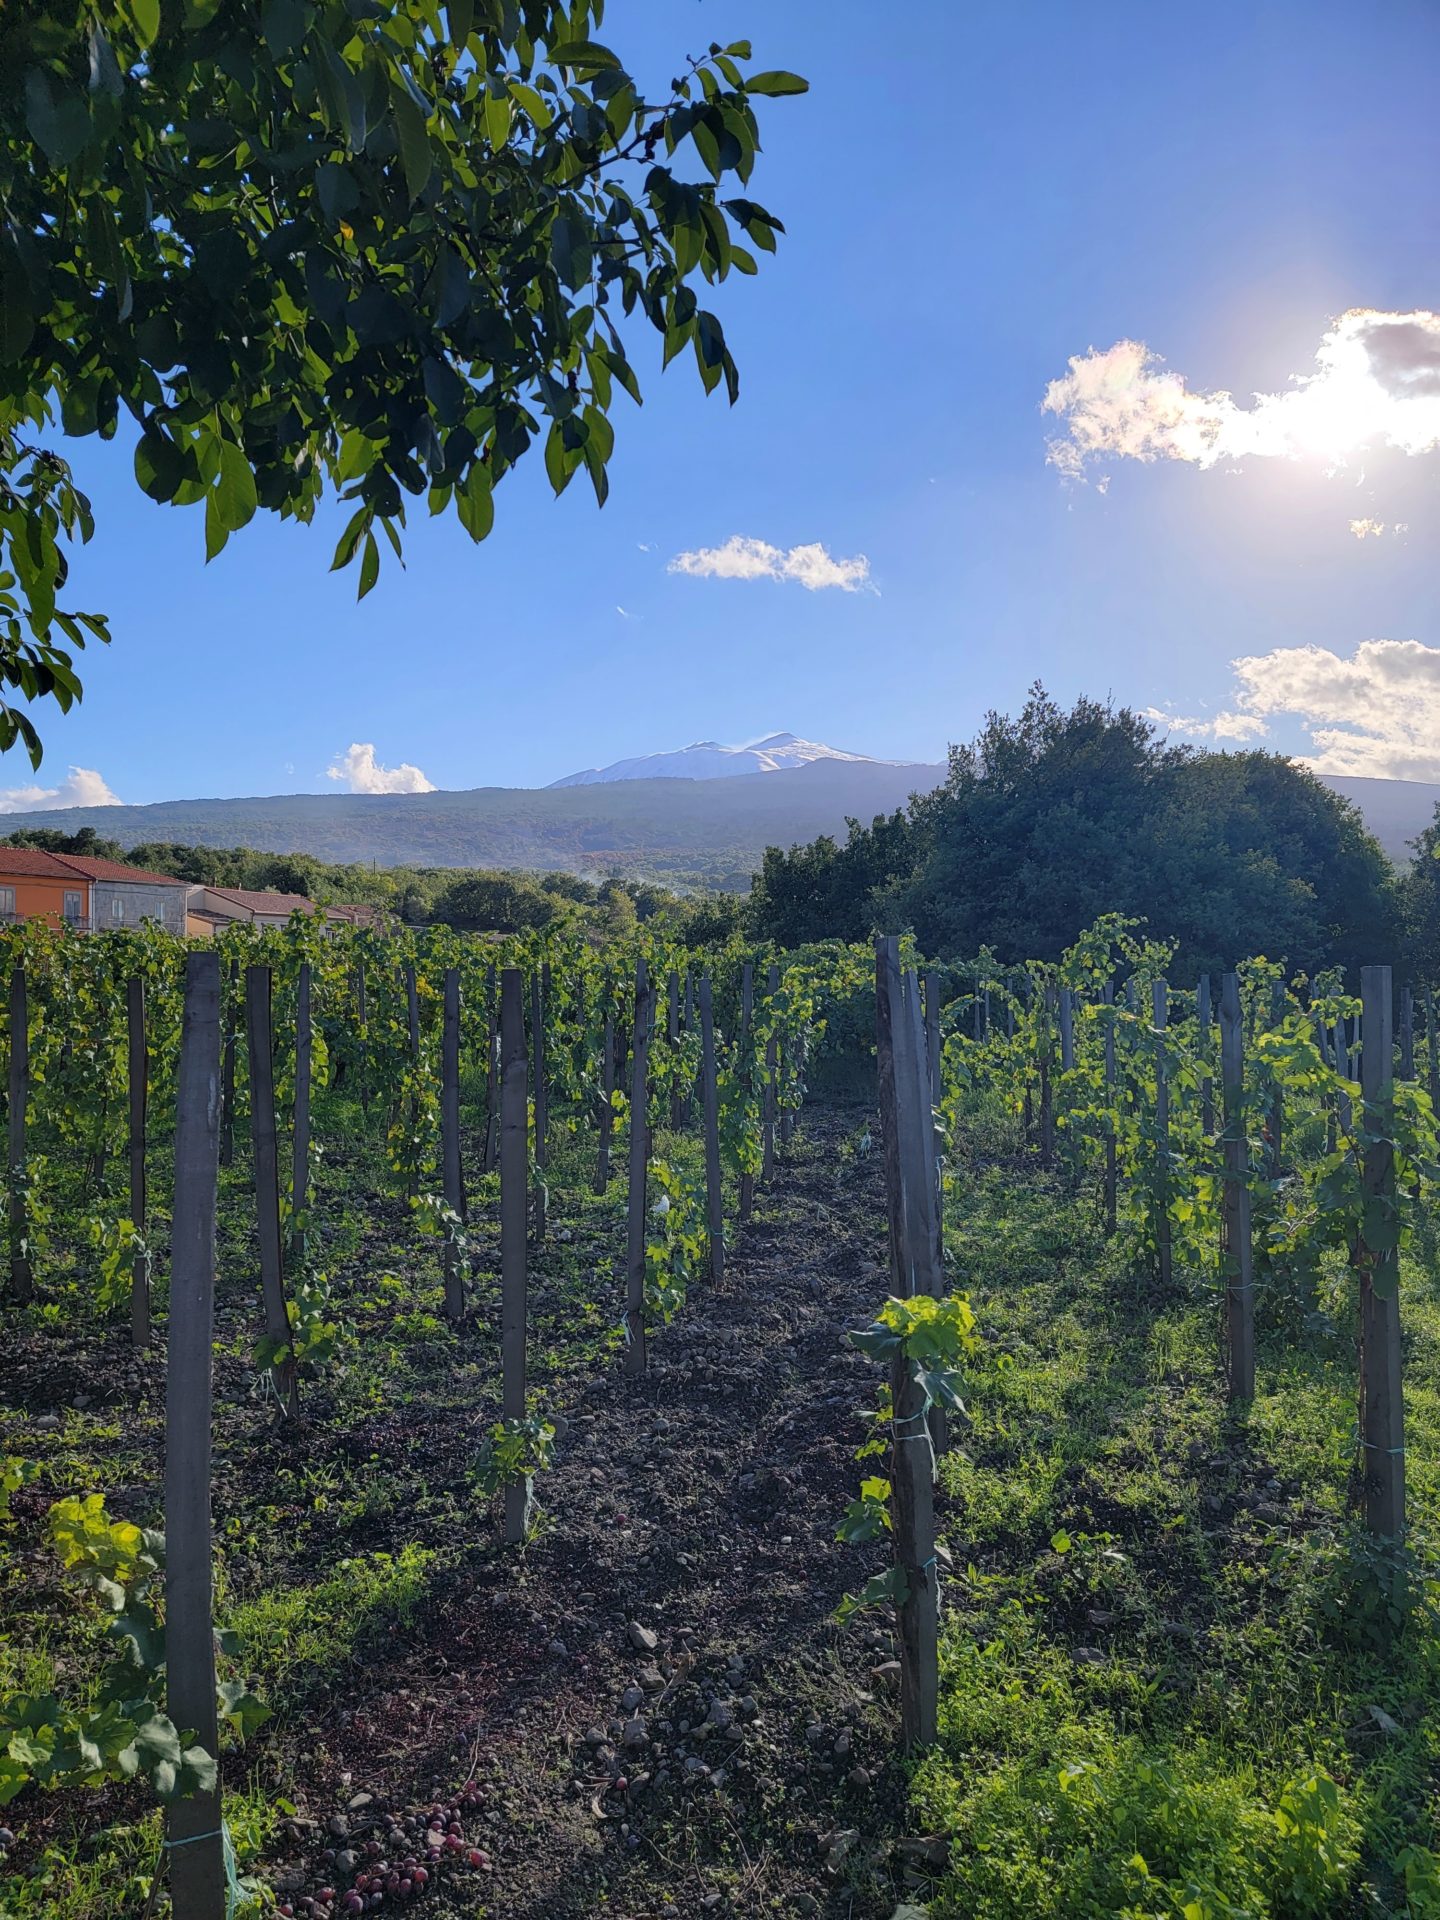 a vineyard with trees and a mountain in the background